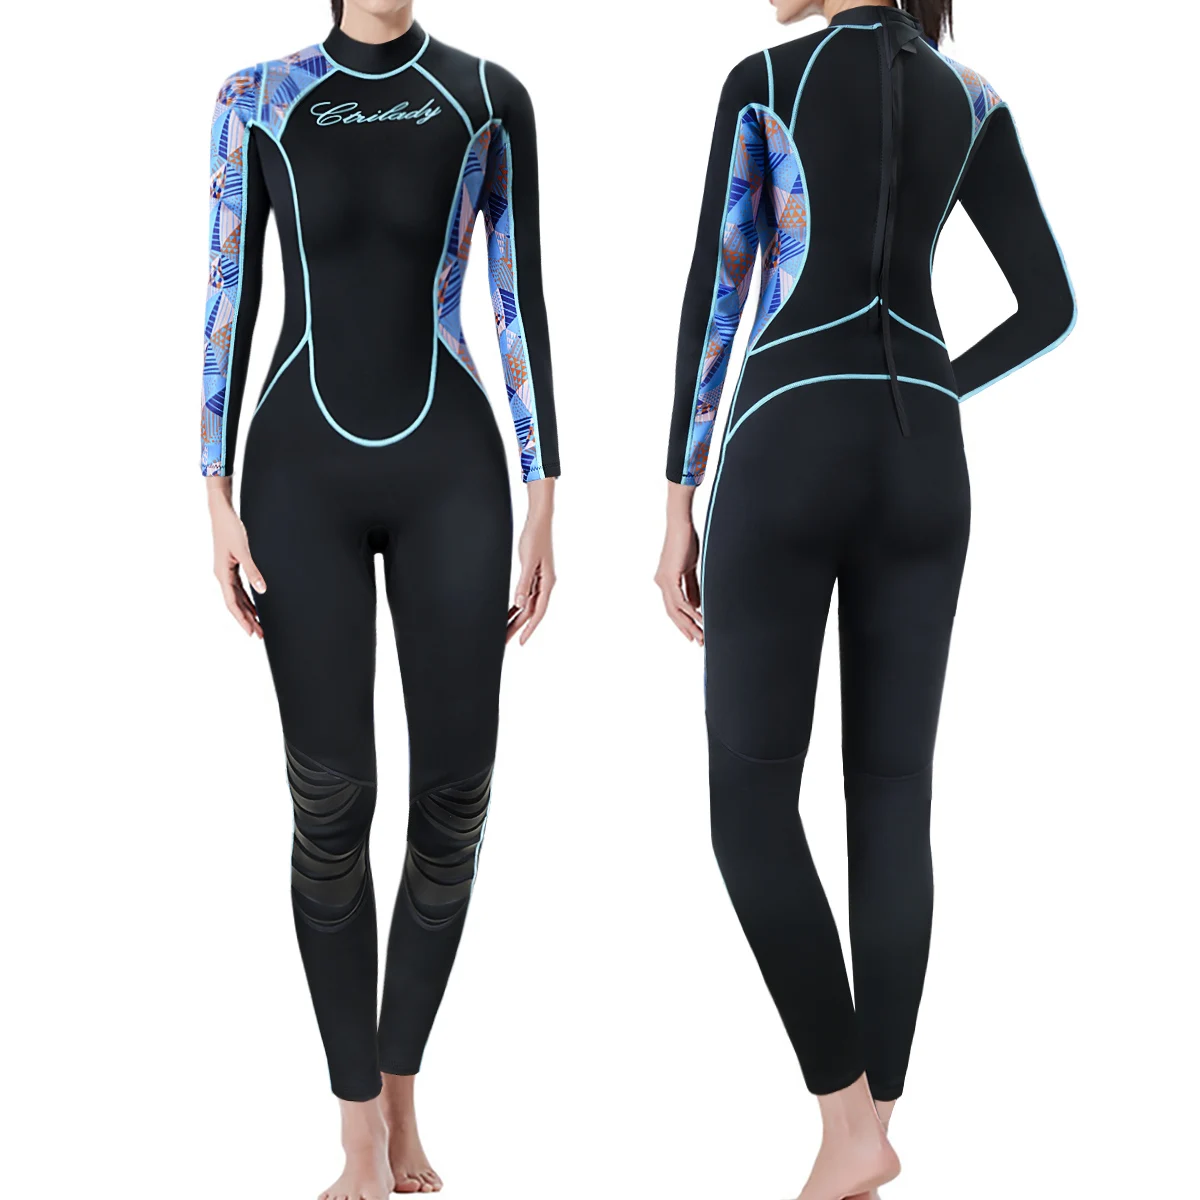 

Women Diving Suit Neoprene One Piece Long Sleeve Full Body Wetsuit for Diving Surfing Swimming Wetsuit